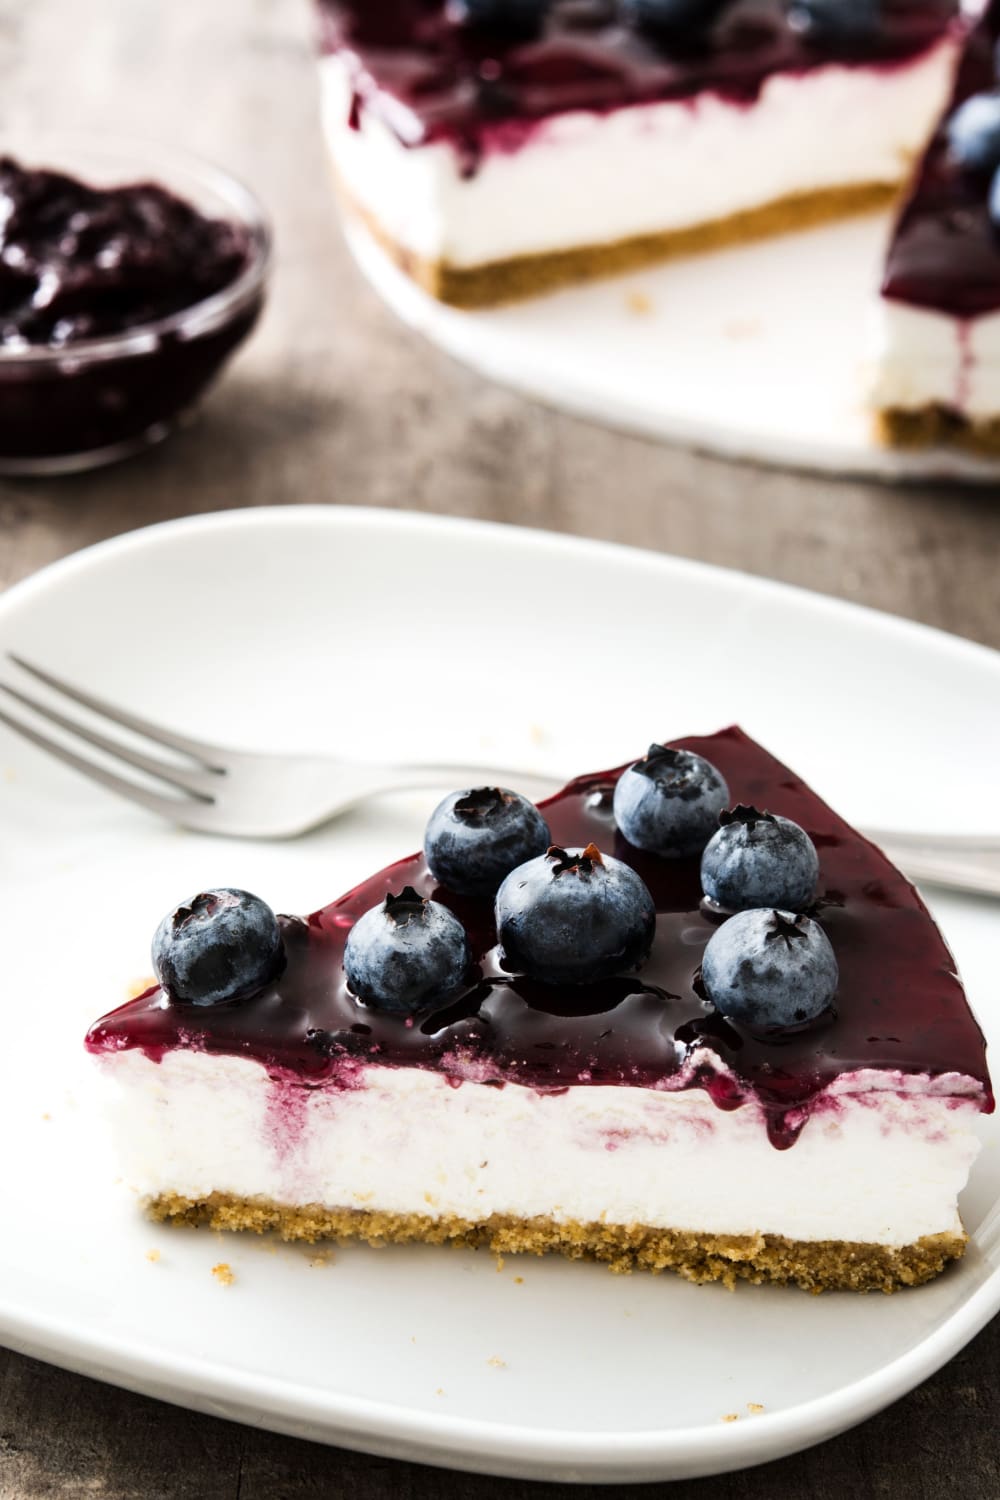 Slice of Blueberry Cheesecake on a White Plate